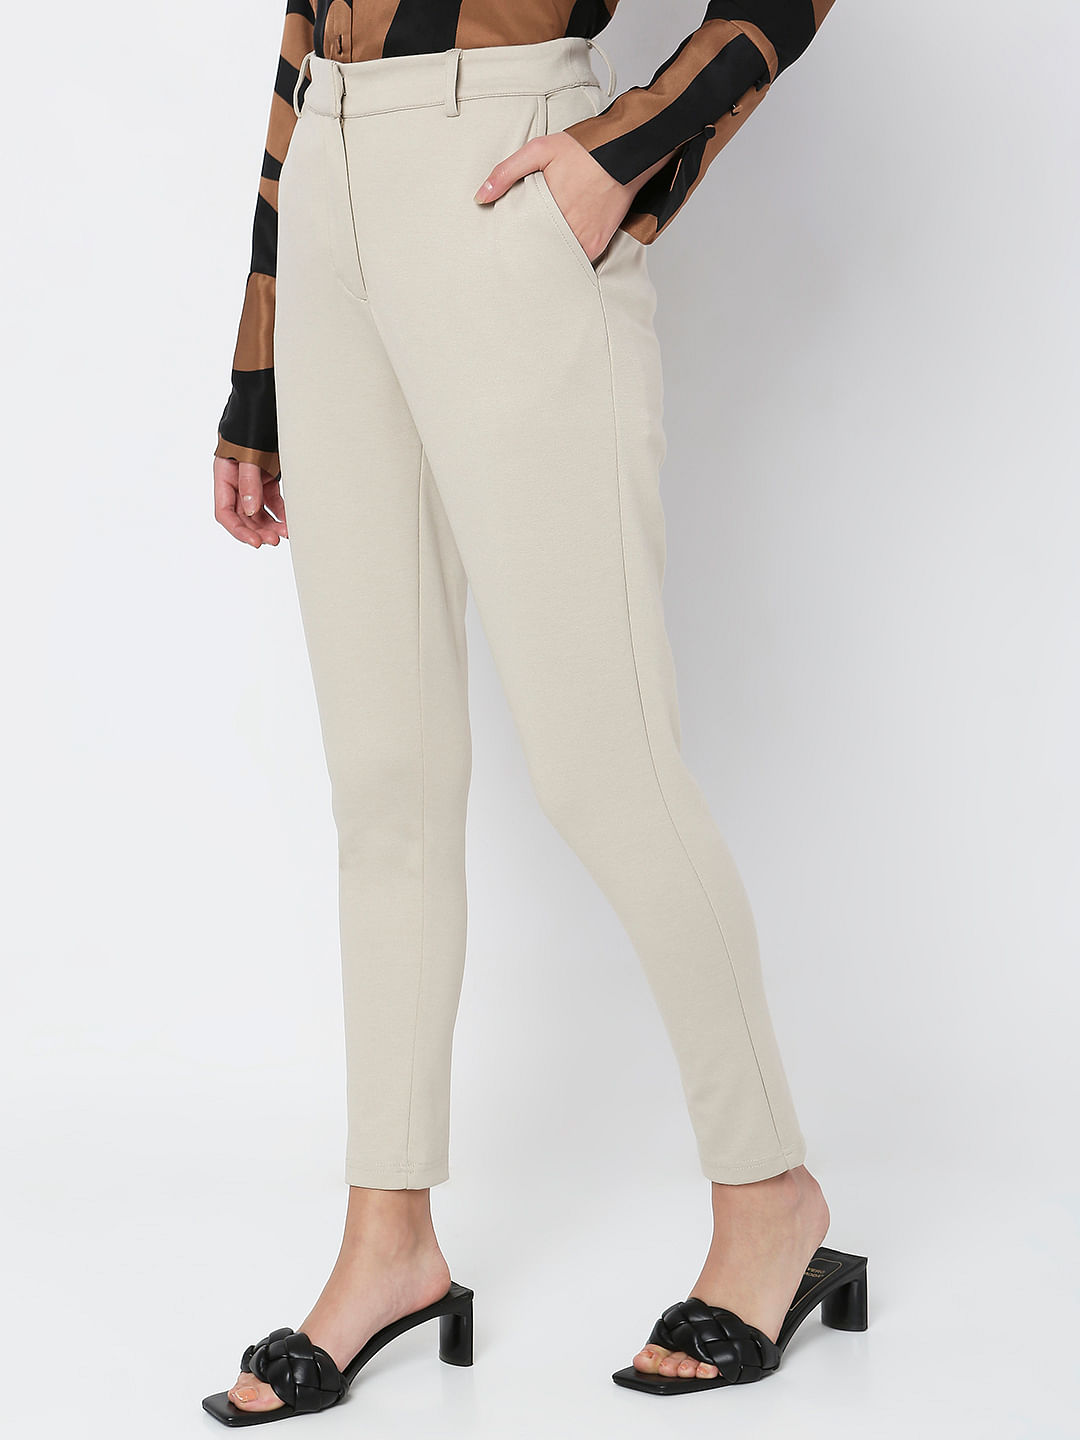 Express | High Waisted Soft & Sleek Button Tab Skinny Pant in Tan | Express  Style Trial